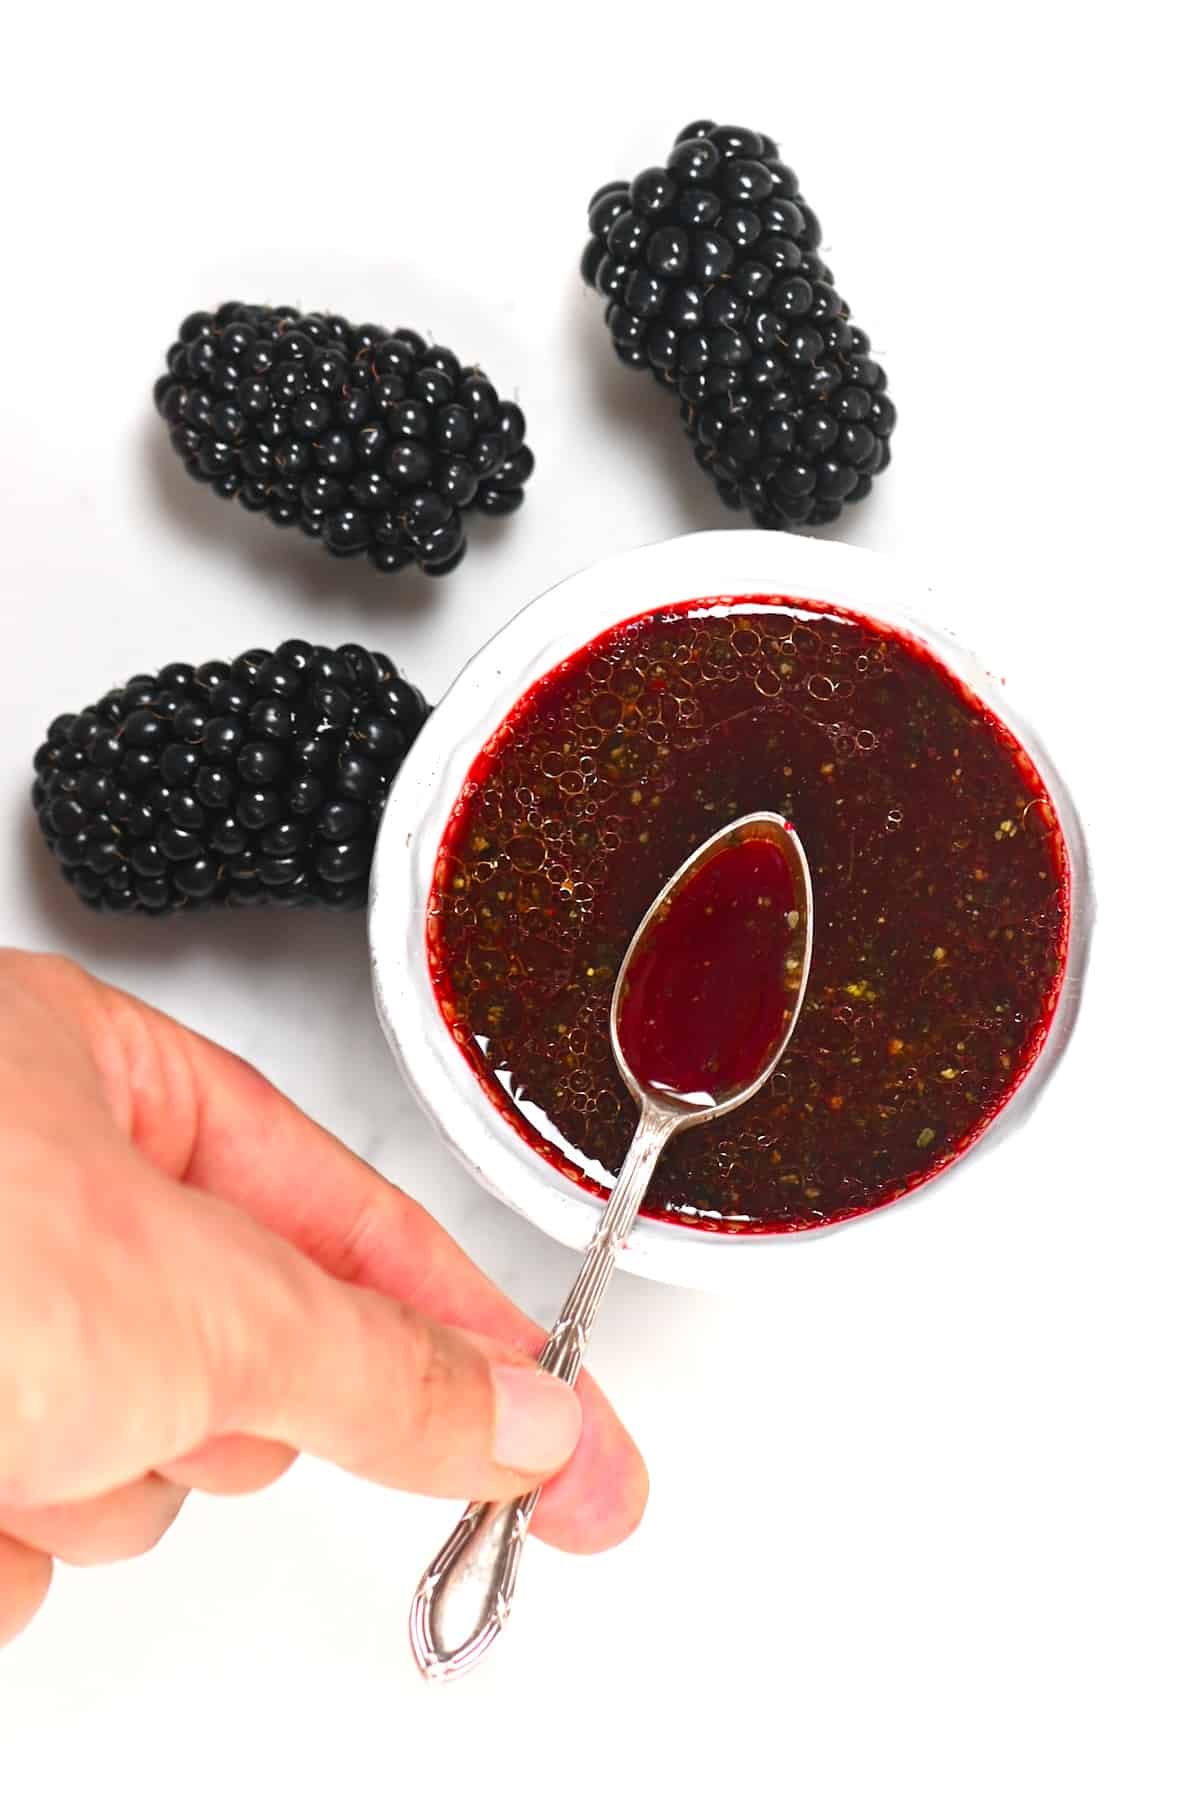 A spoon with blackberry salad dressing over a small bowl